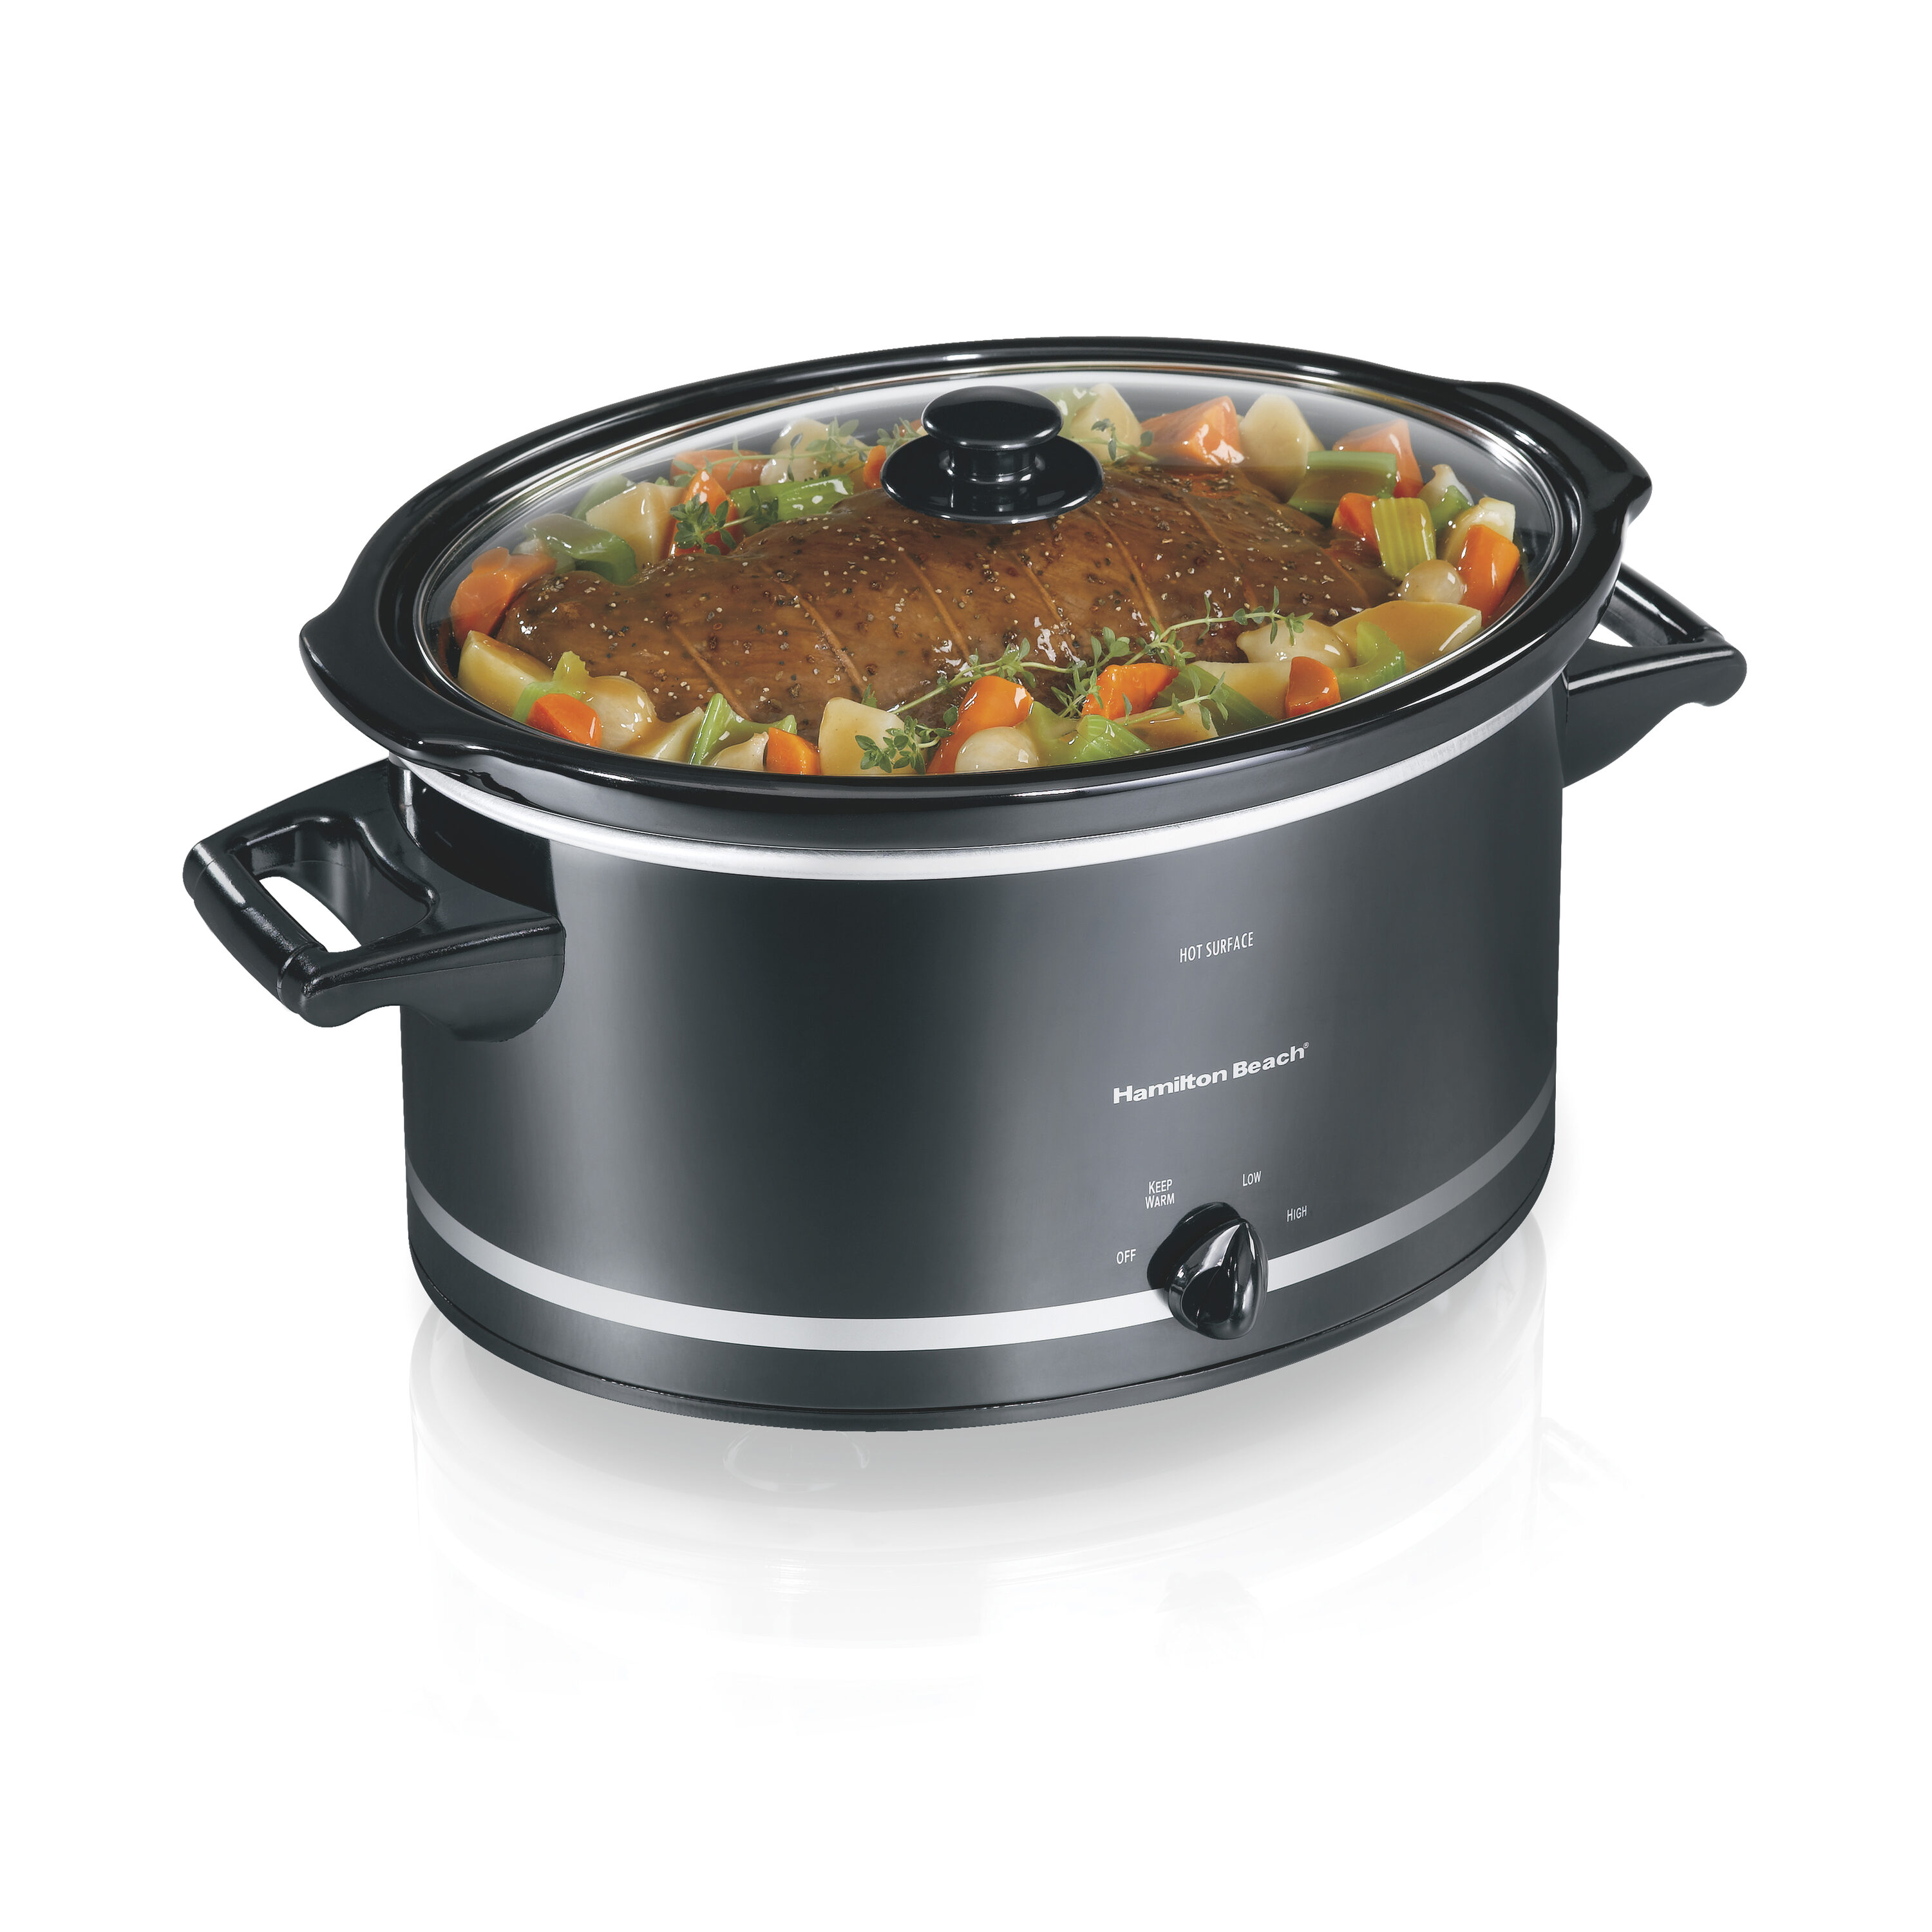 Large Slow Cookers